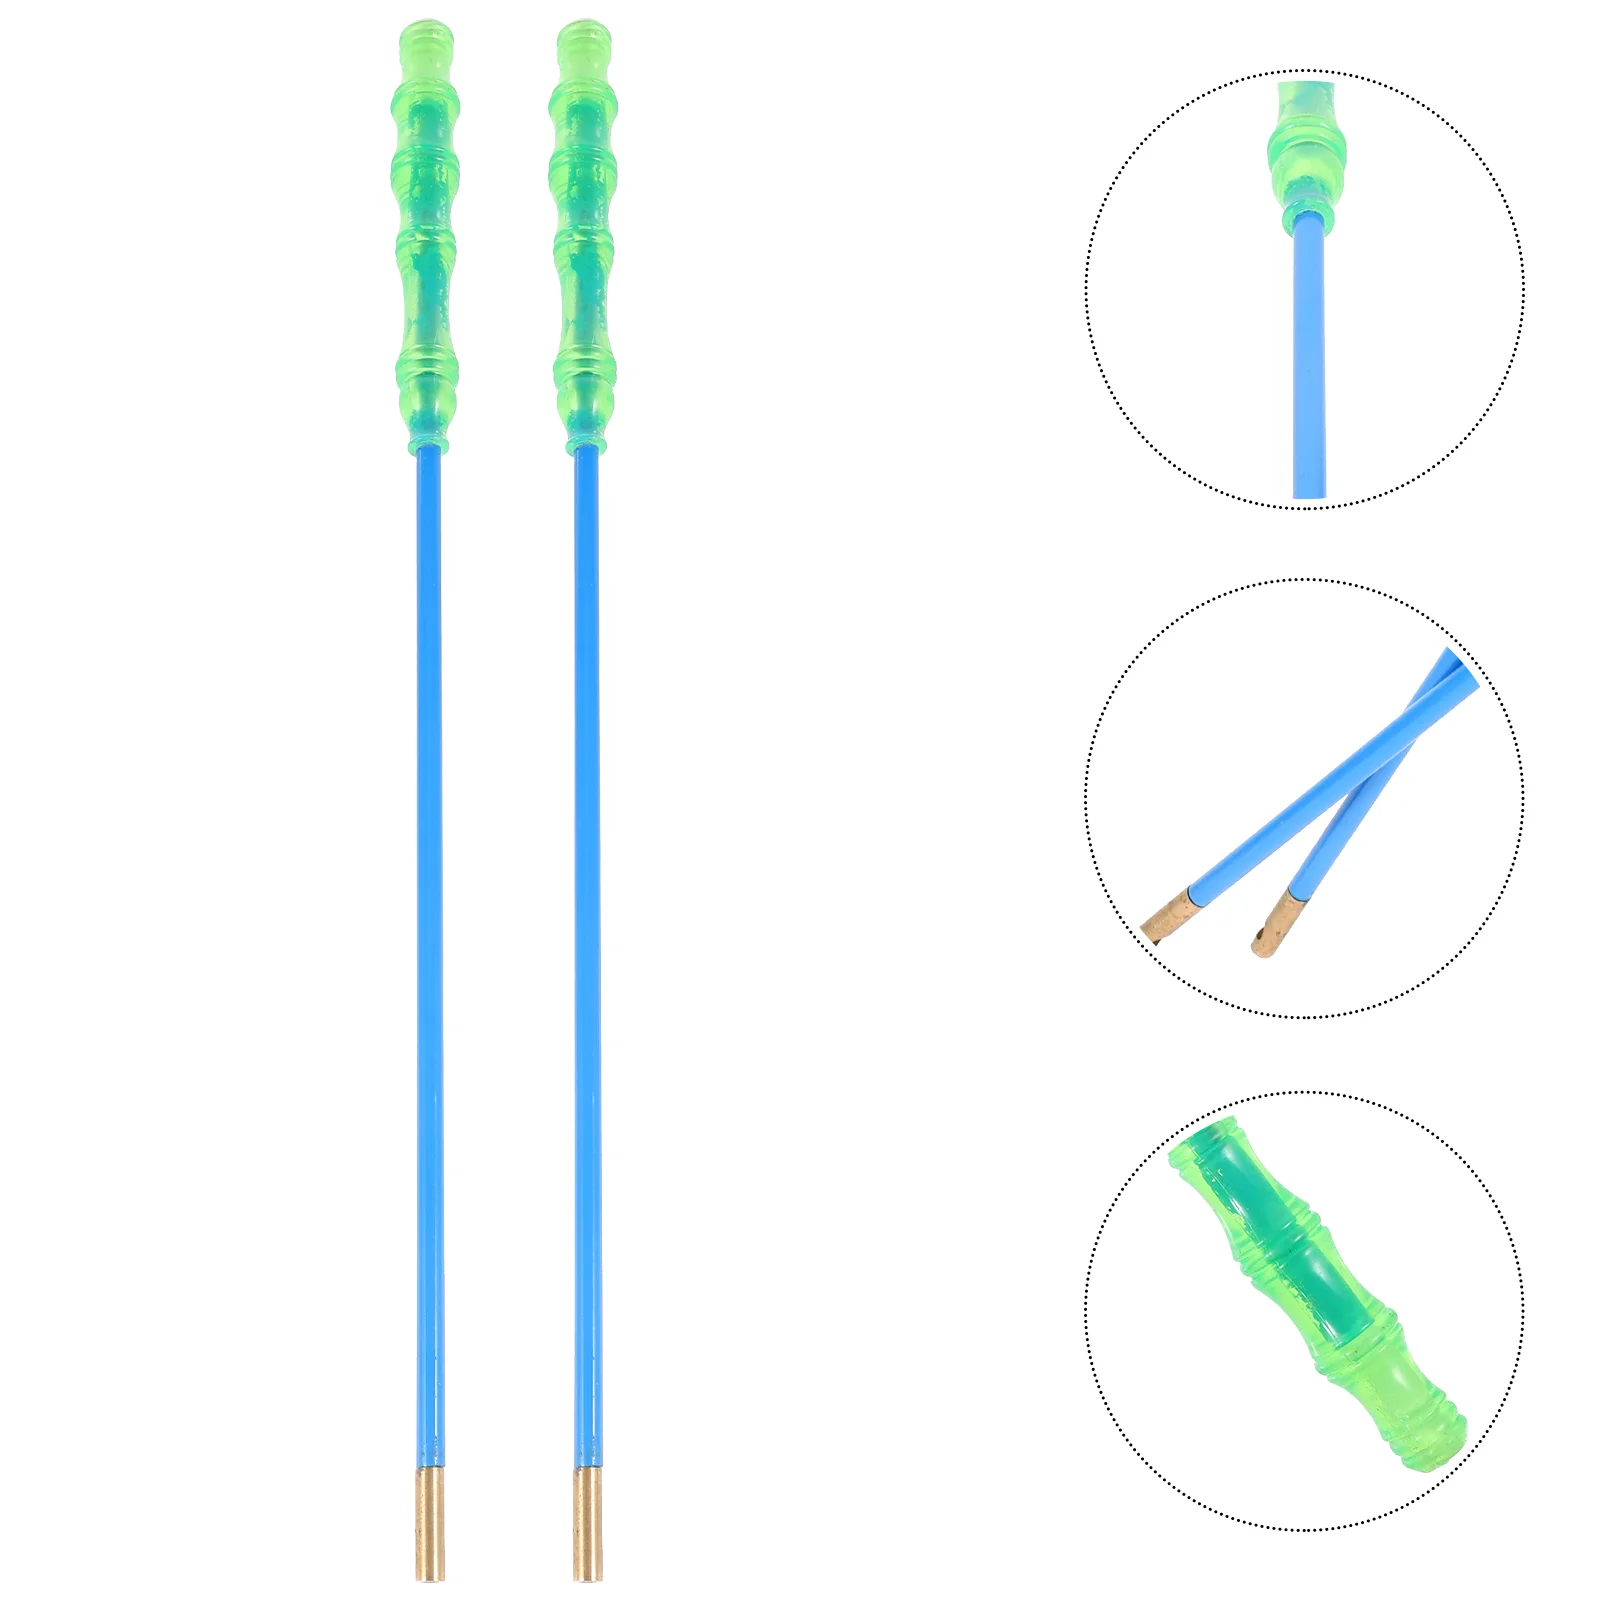 

2 Pcs Diabolo Pole Stick Classic for The Elderly FRP Replacement Supplies Juggling Traditional